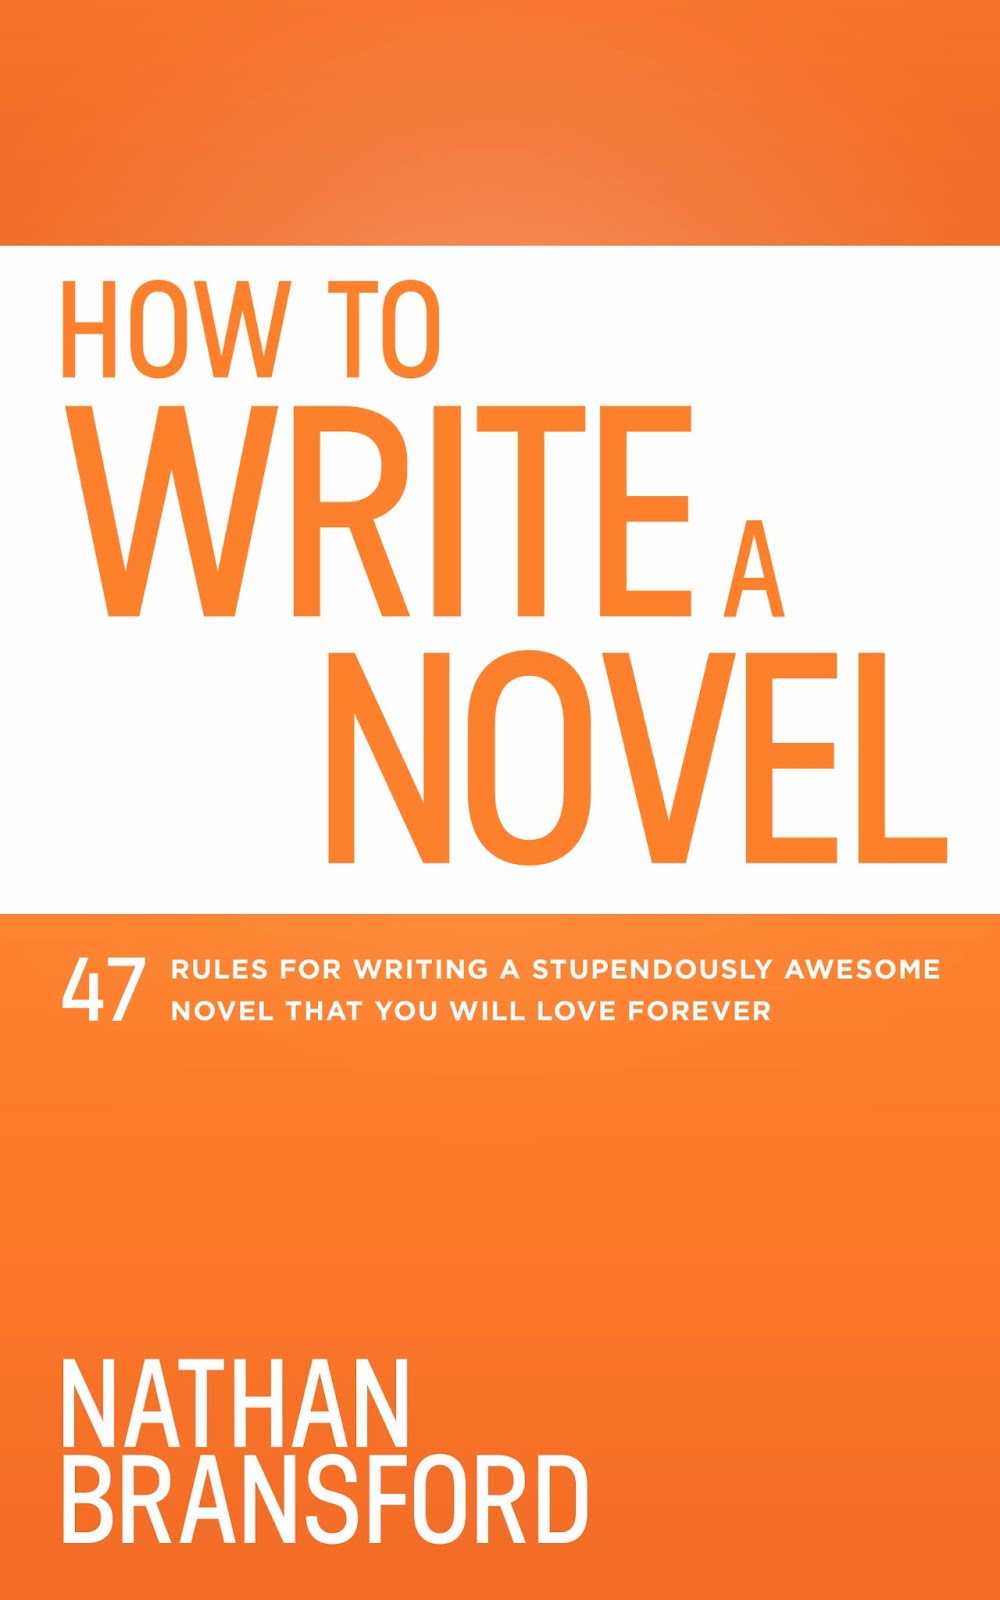 How to write a book proposal overview